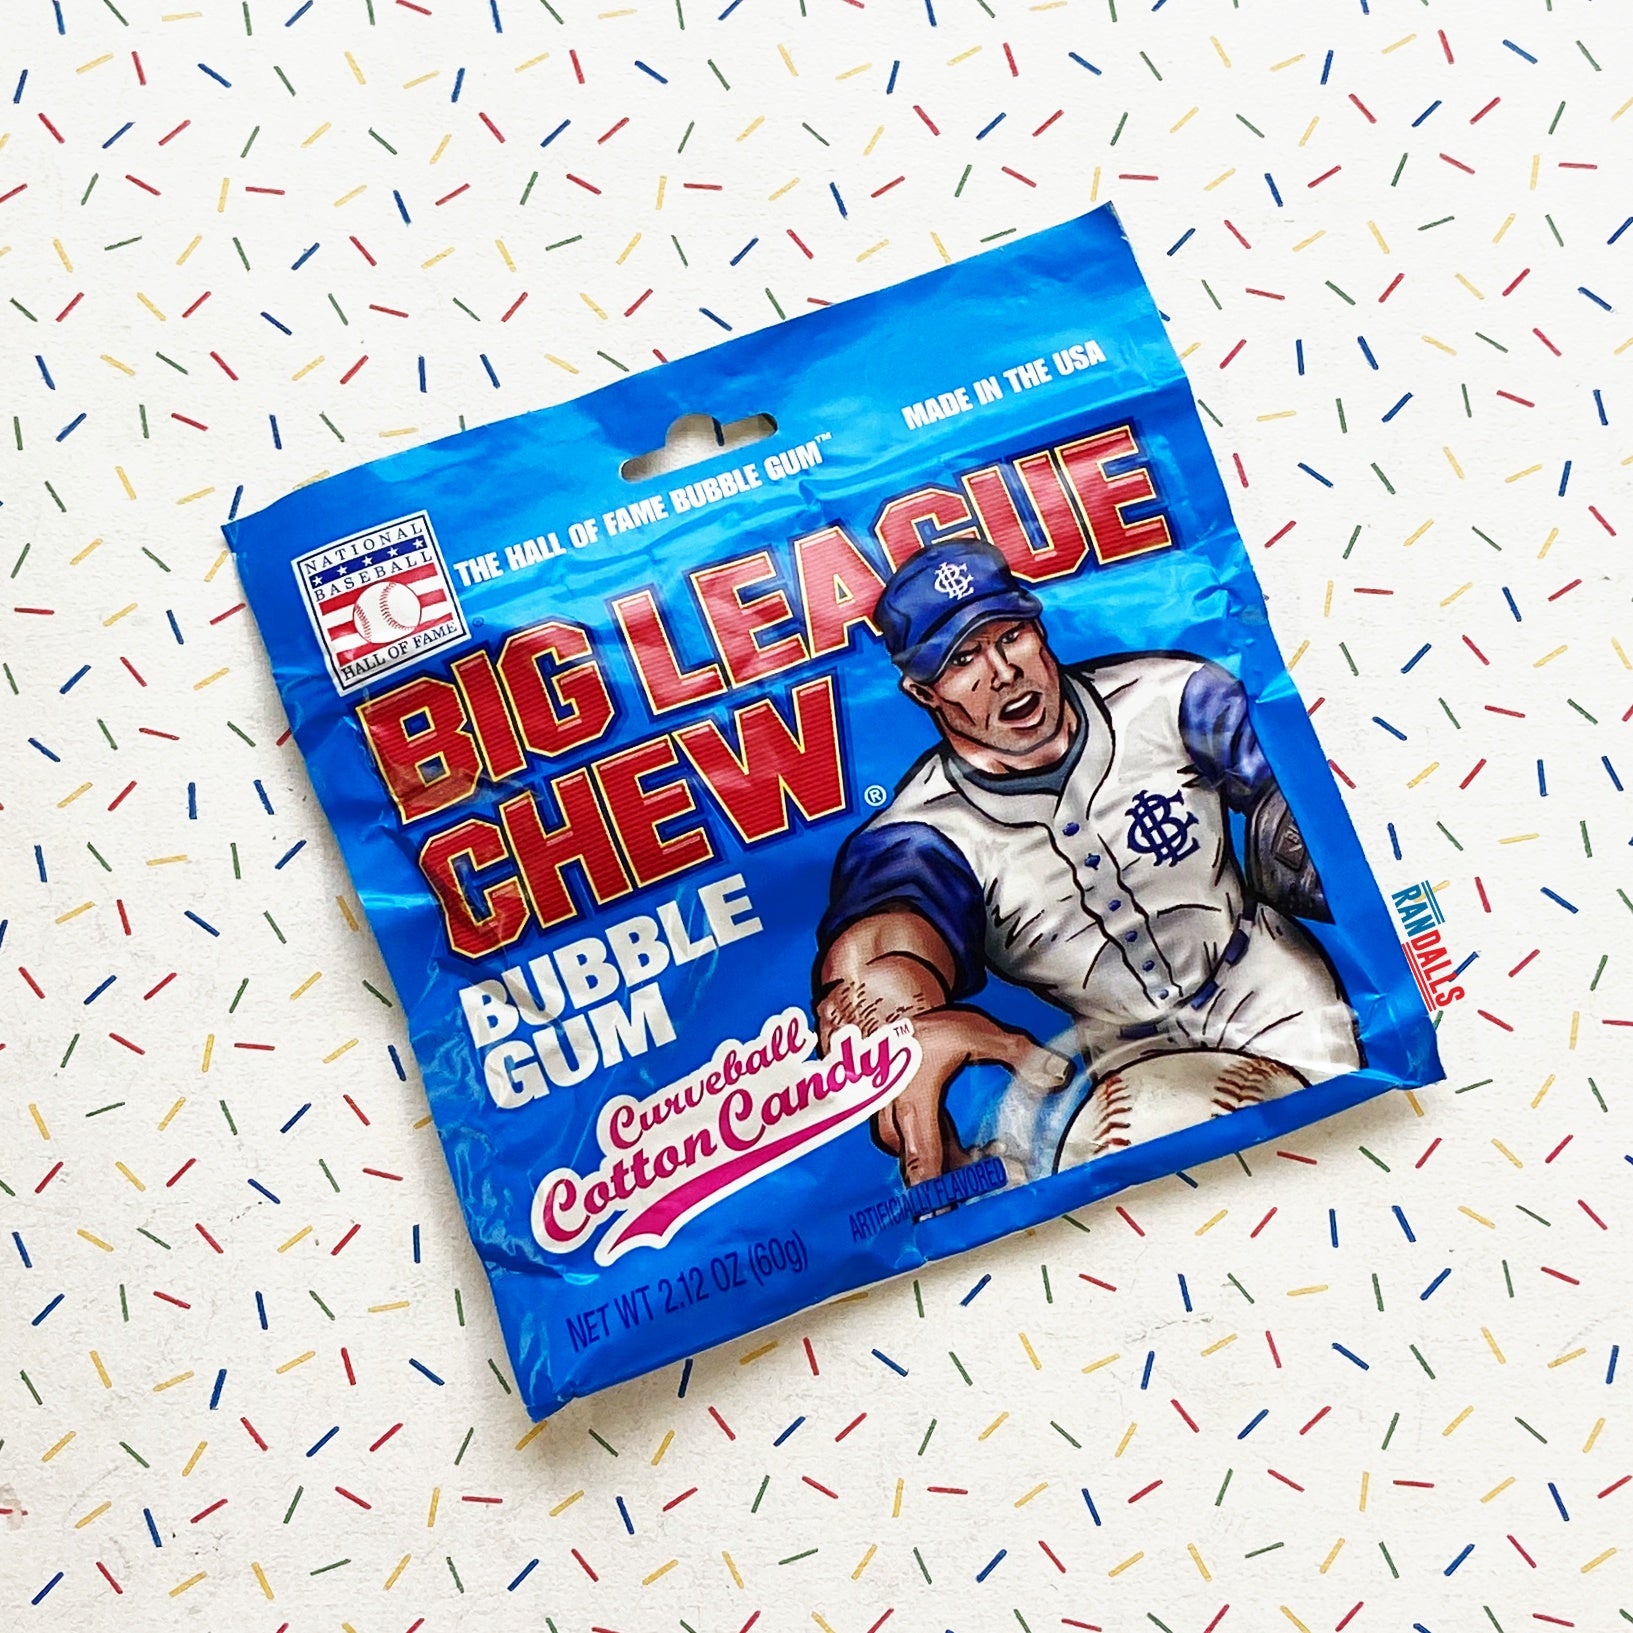 big league chew, bubblegum, chewing gum, national baseball hall of fame, the hall of fame bubble gum, made in the usa, chewing gum, american gum, curveball cotton candy, usa, randalls,